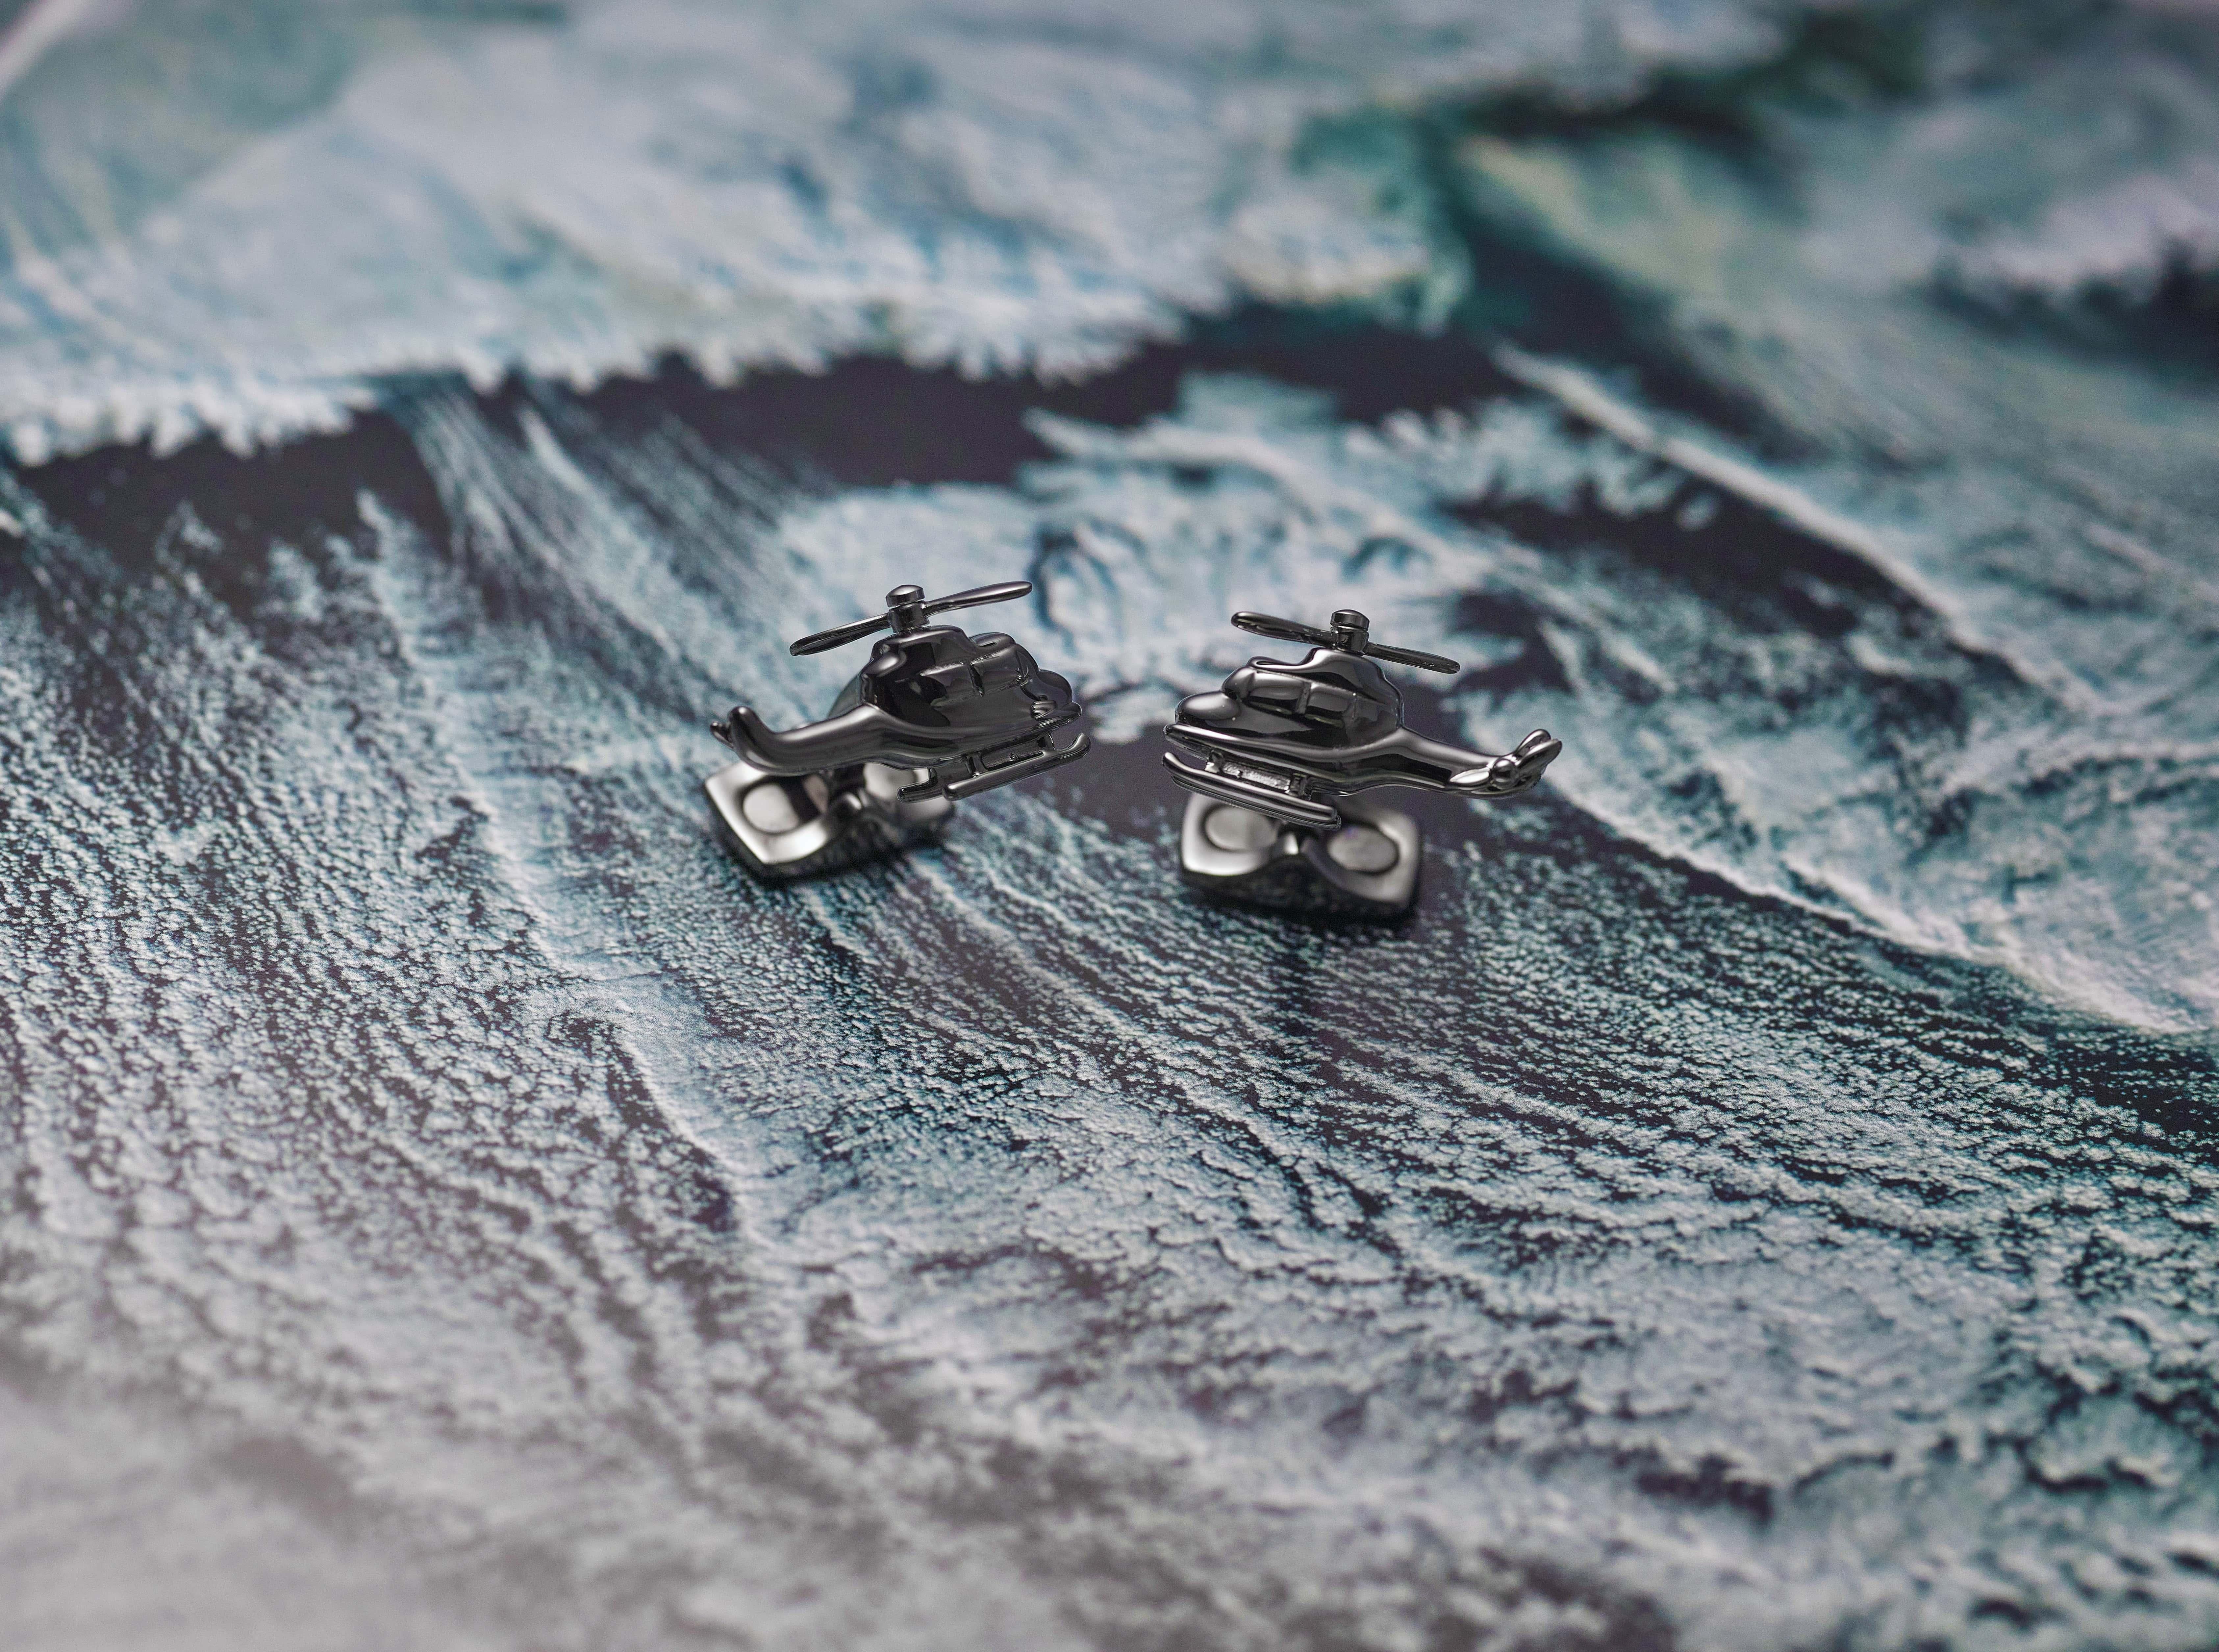 DEAKIN & FRANCIS, Piccadilly Arcade, London

Ride the skies with these dark grey rhodium helicopter cufflinks. Perfect for all budding pilots or aviation enthusiasts. You can even spin the propellers to ensure you’re ready for the runway!